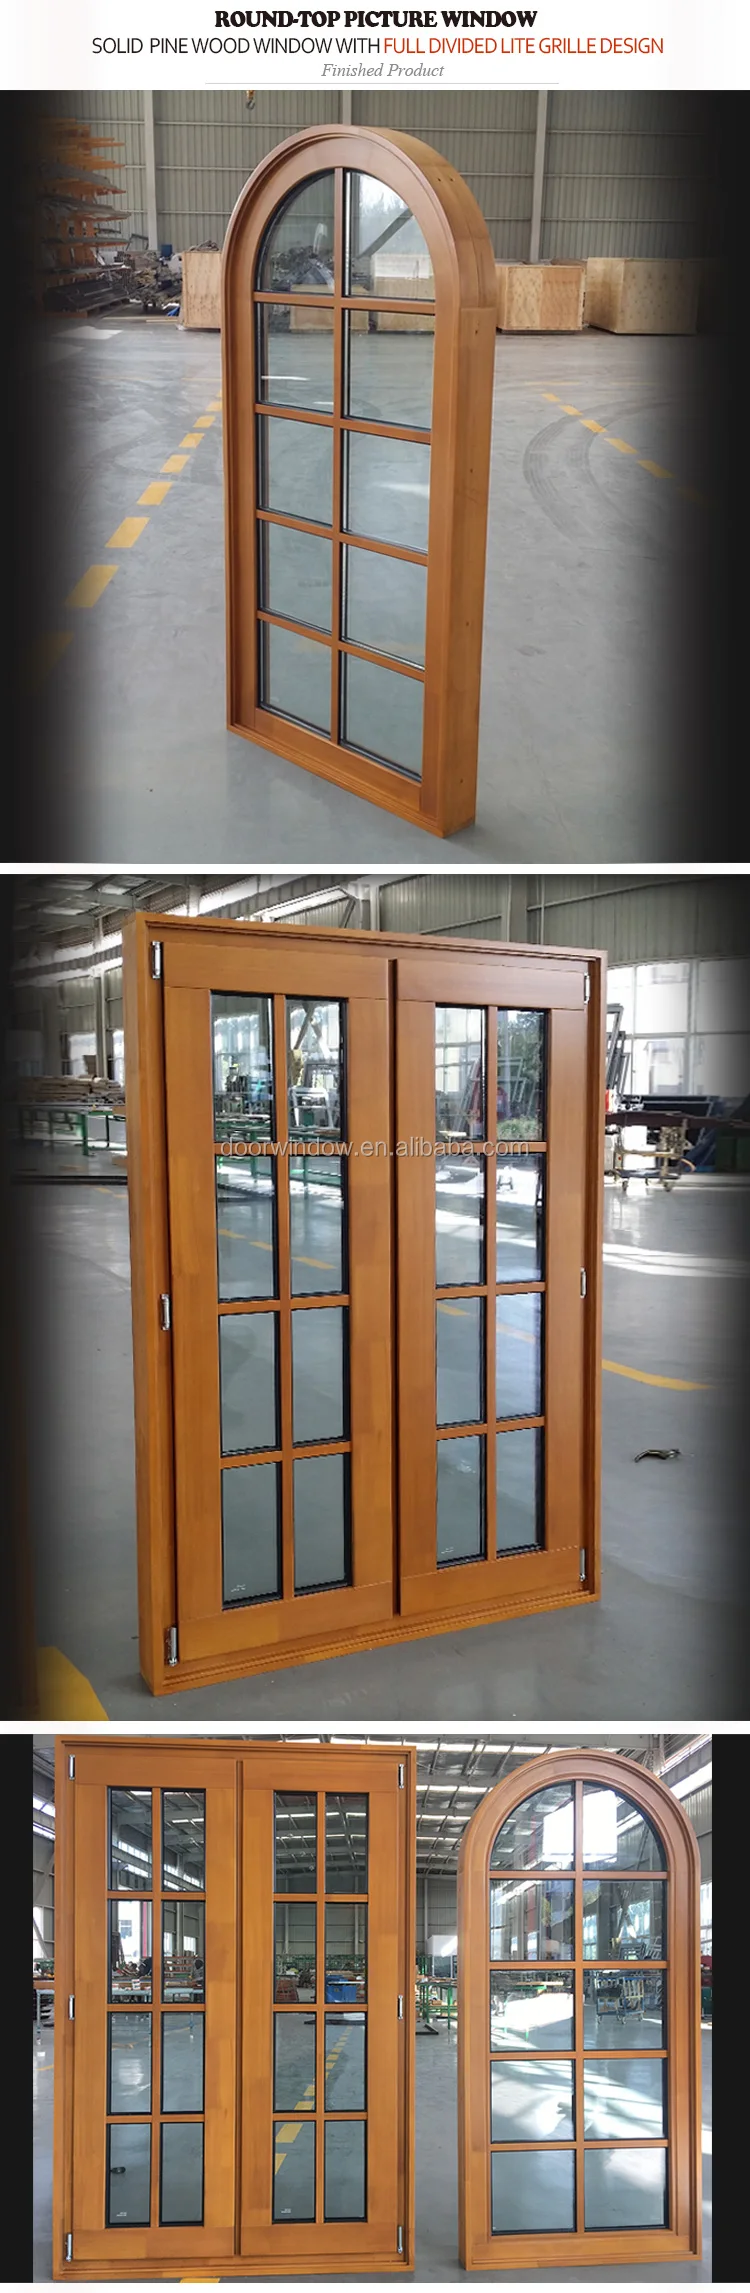 French style fixed wood window with wood window grille design made of teak wood